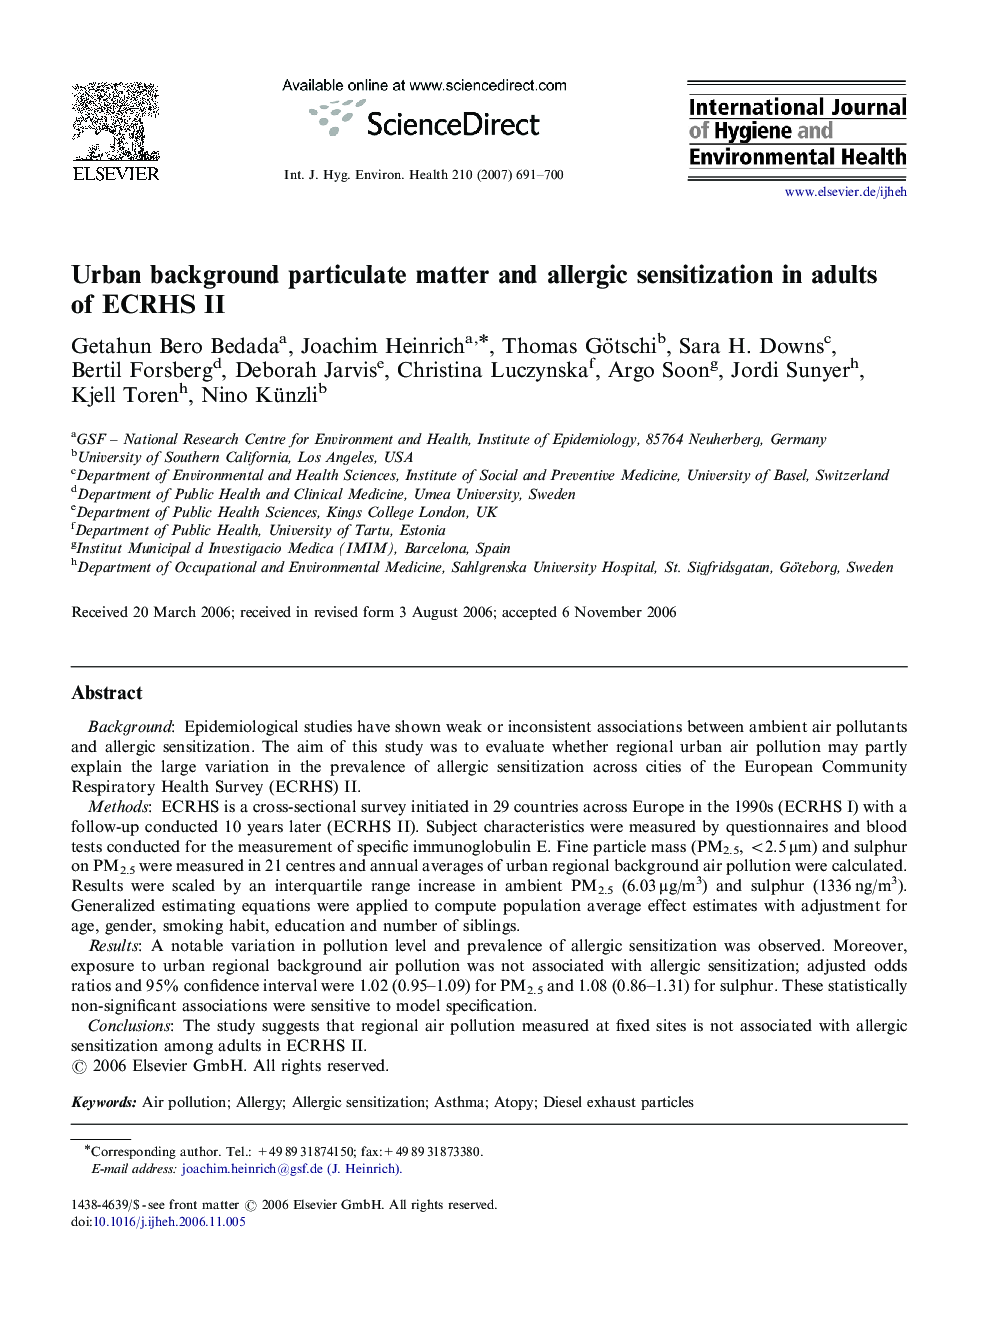 Urban background particulate matter and allergic sensitization in adults of ECRHS II